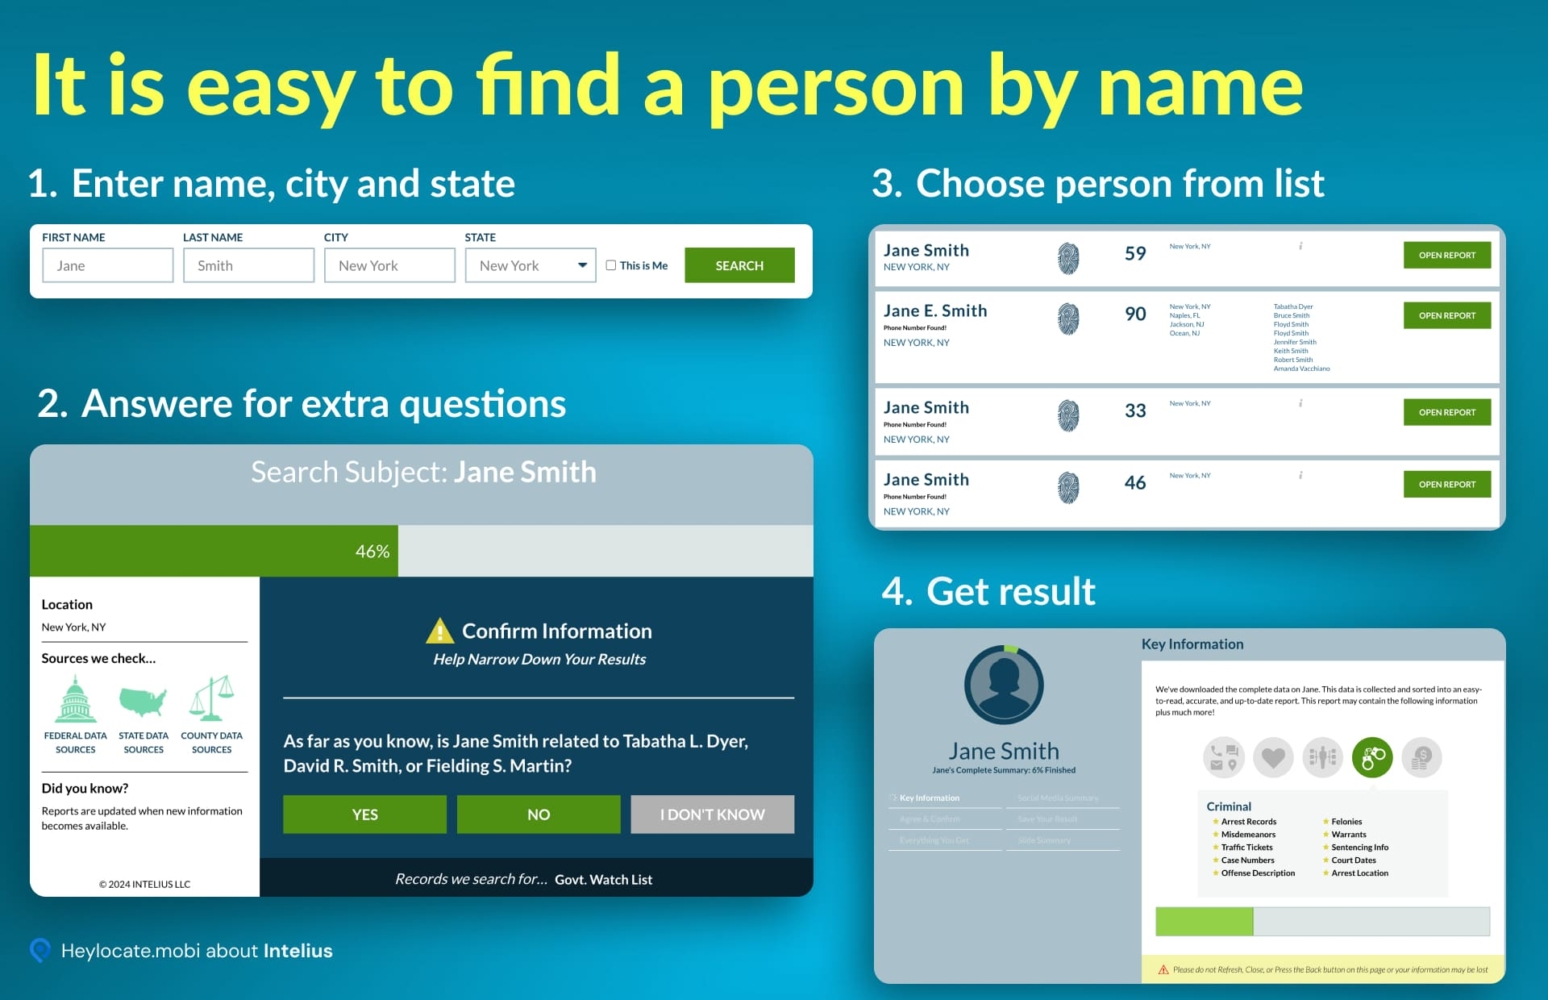 A step-by-step guide graphic on using Intelius to find a person by name. It shows a four-step process: 1. entering a name, city, and state, 2. answering extra questions to narrow the search, 3. choosing a person from a list, and 4. getting detailed results, which include personal information and criminal records.